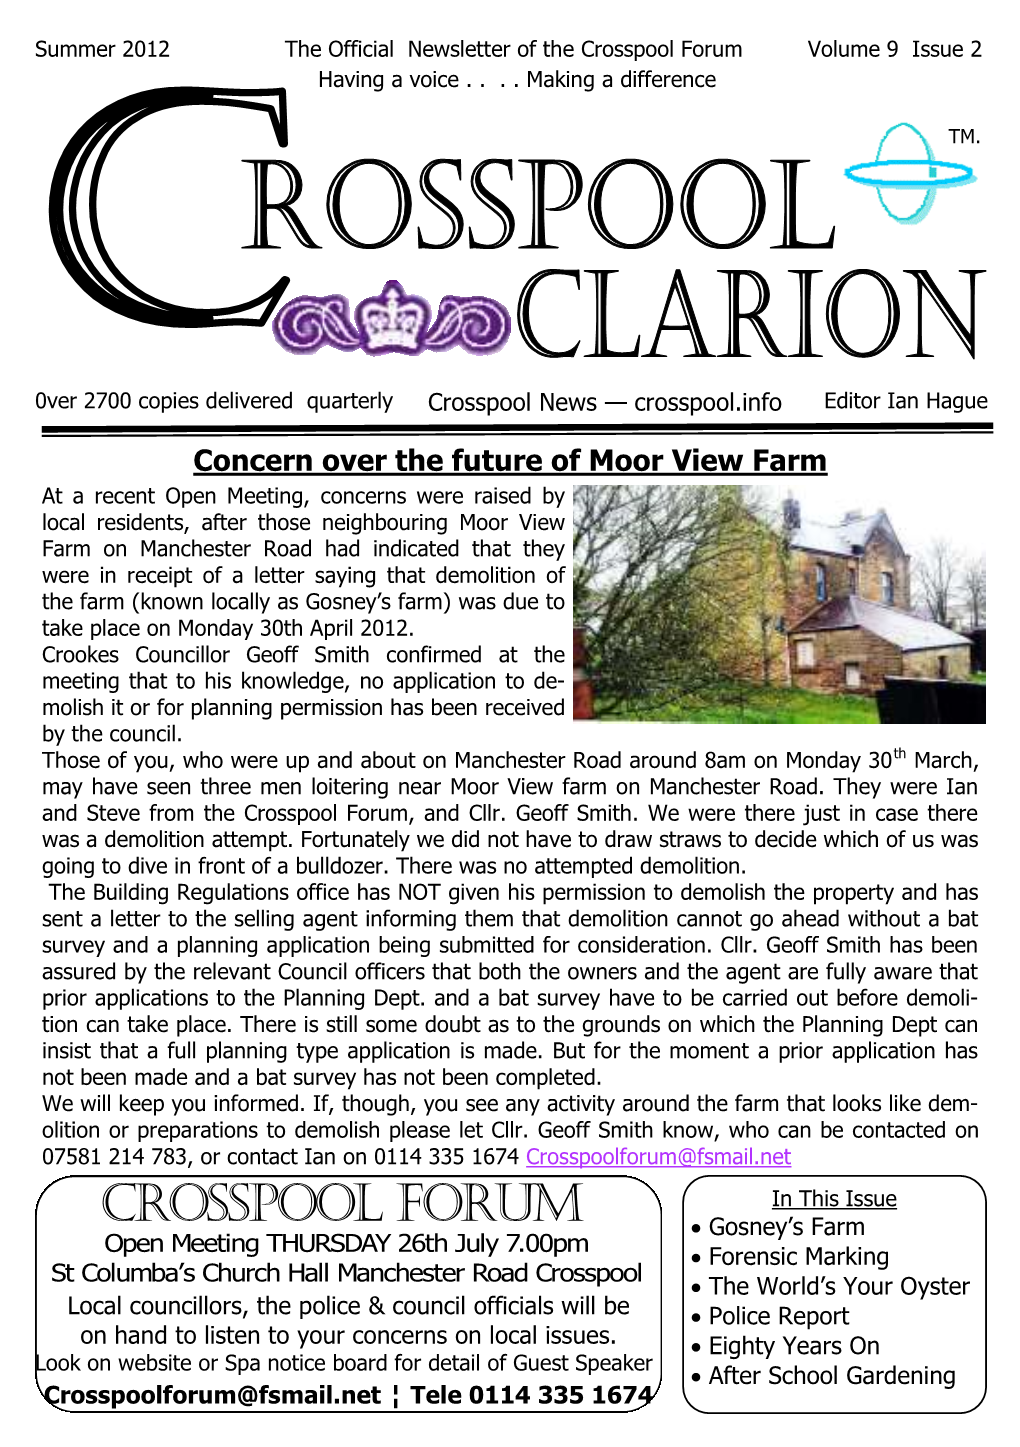 Concern Over the Future of Moor View Farm